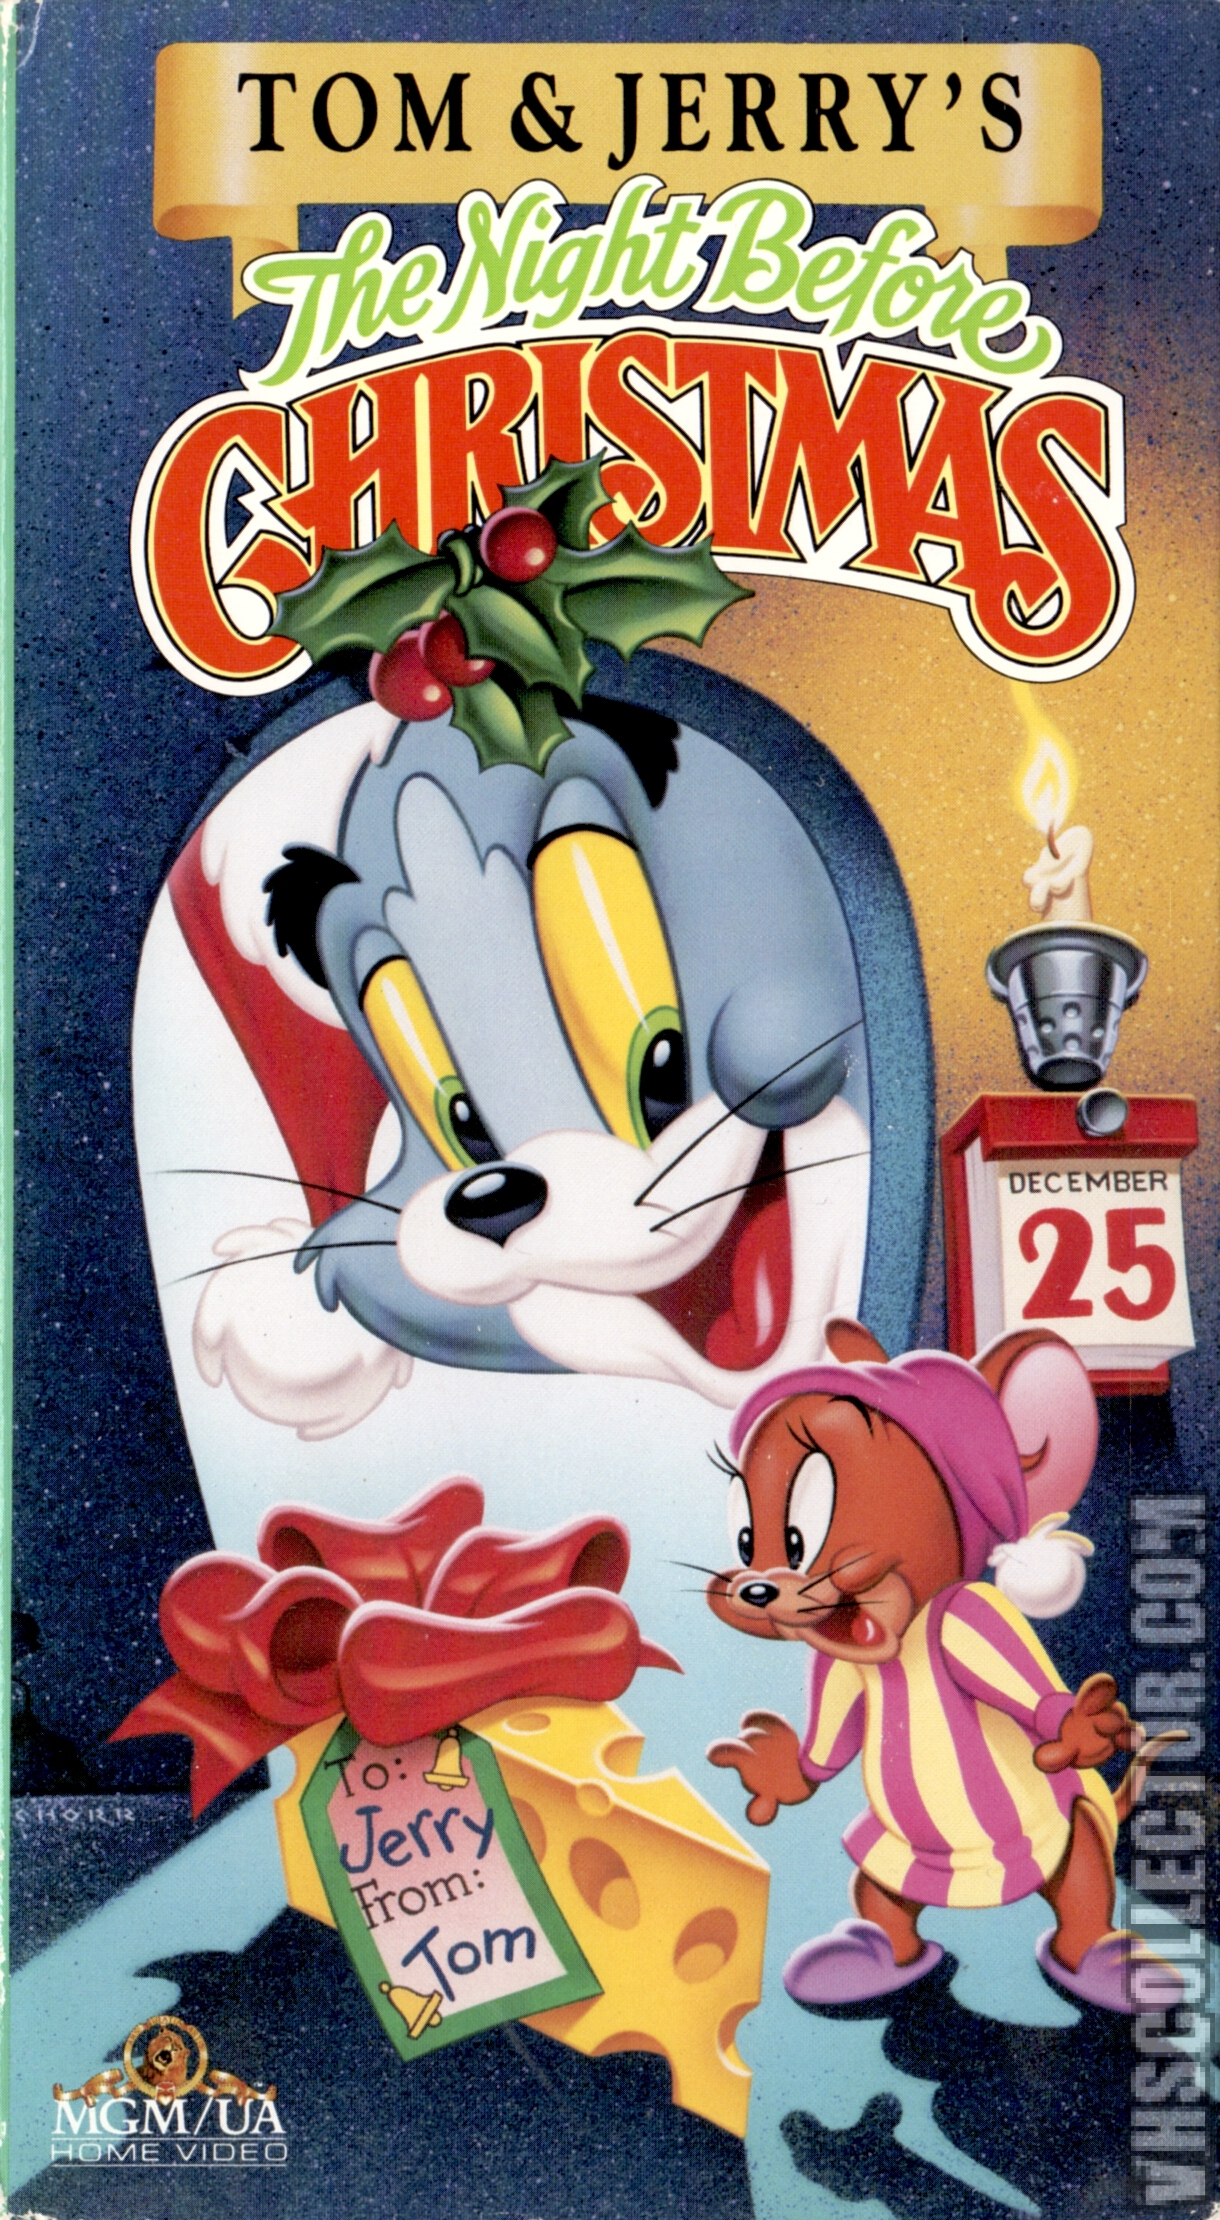 Tom & Jerry's The Night Before Christmas | VHSCollector.com